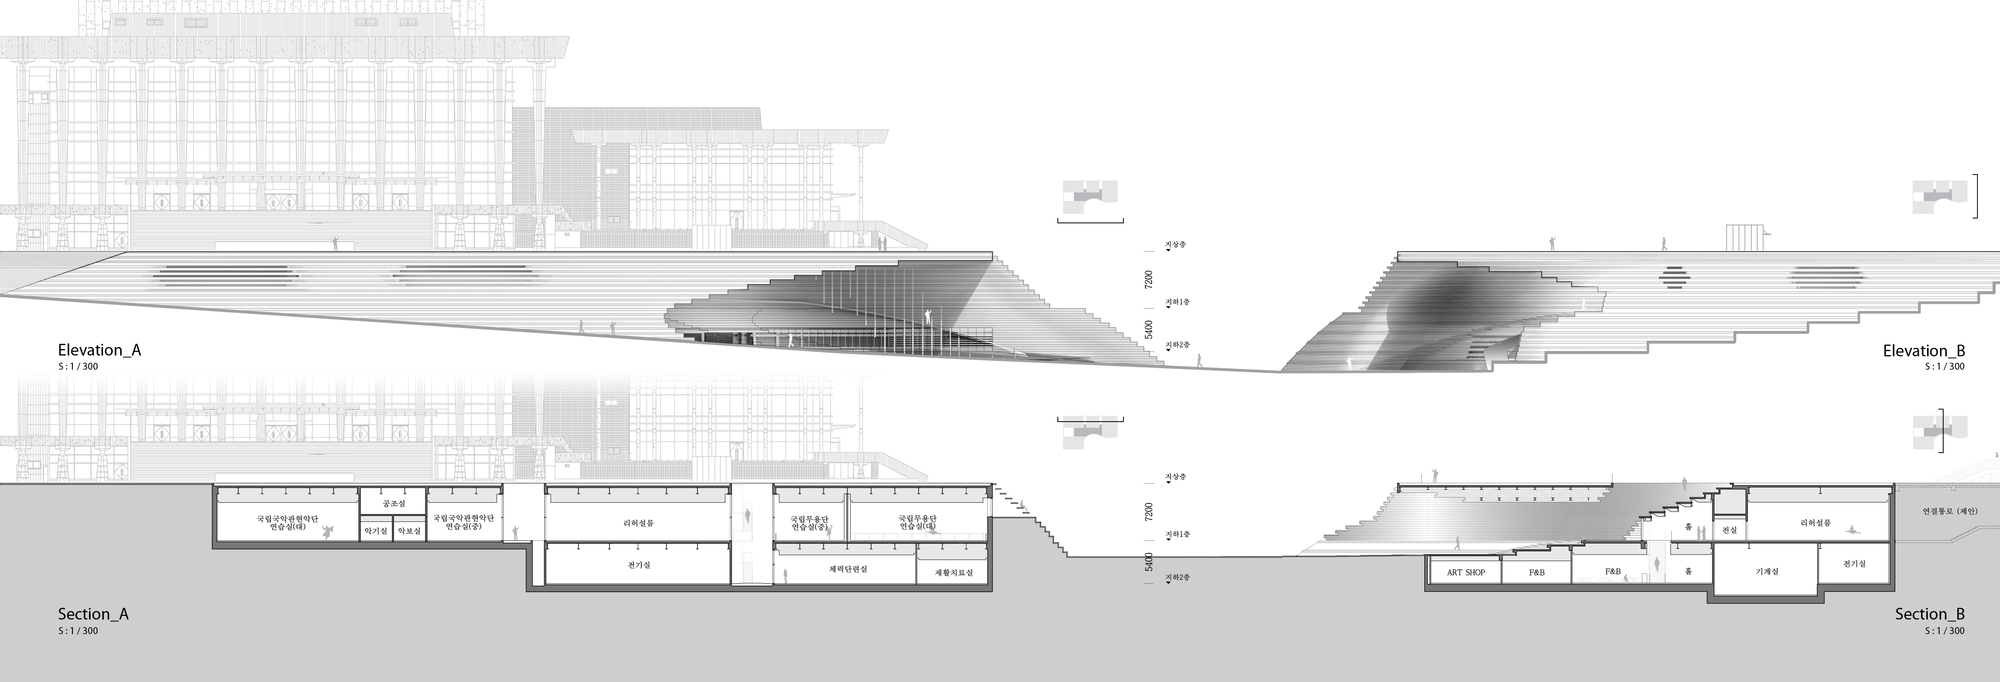 515b1bcdb3fc4b000300000a_performing-arts-studio-of-the-national-theatre-of-korea-second-prize-winning-proposal-archiplan_g_elevations_sections